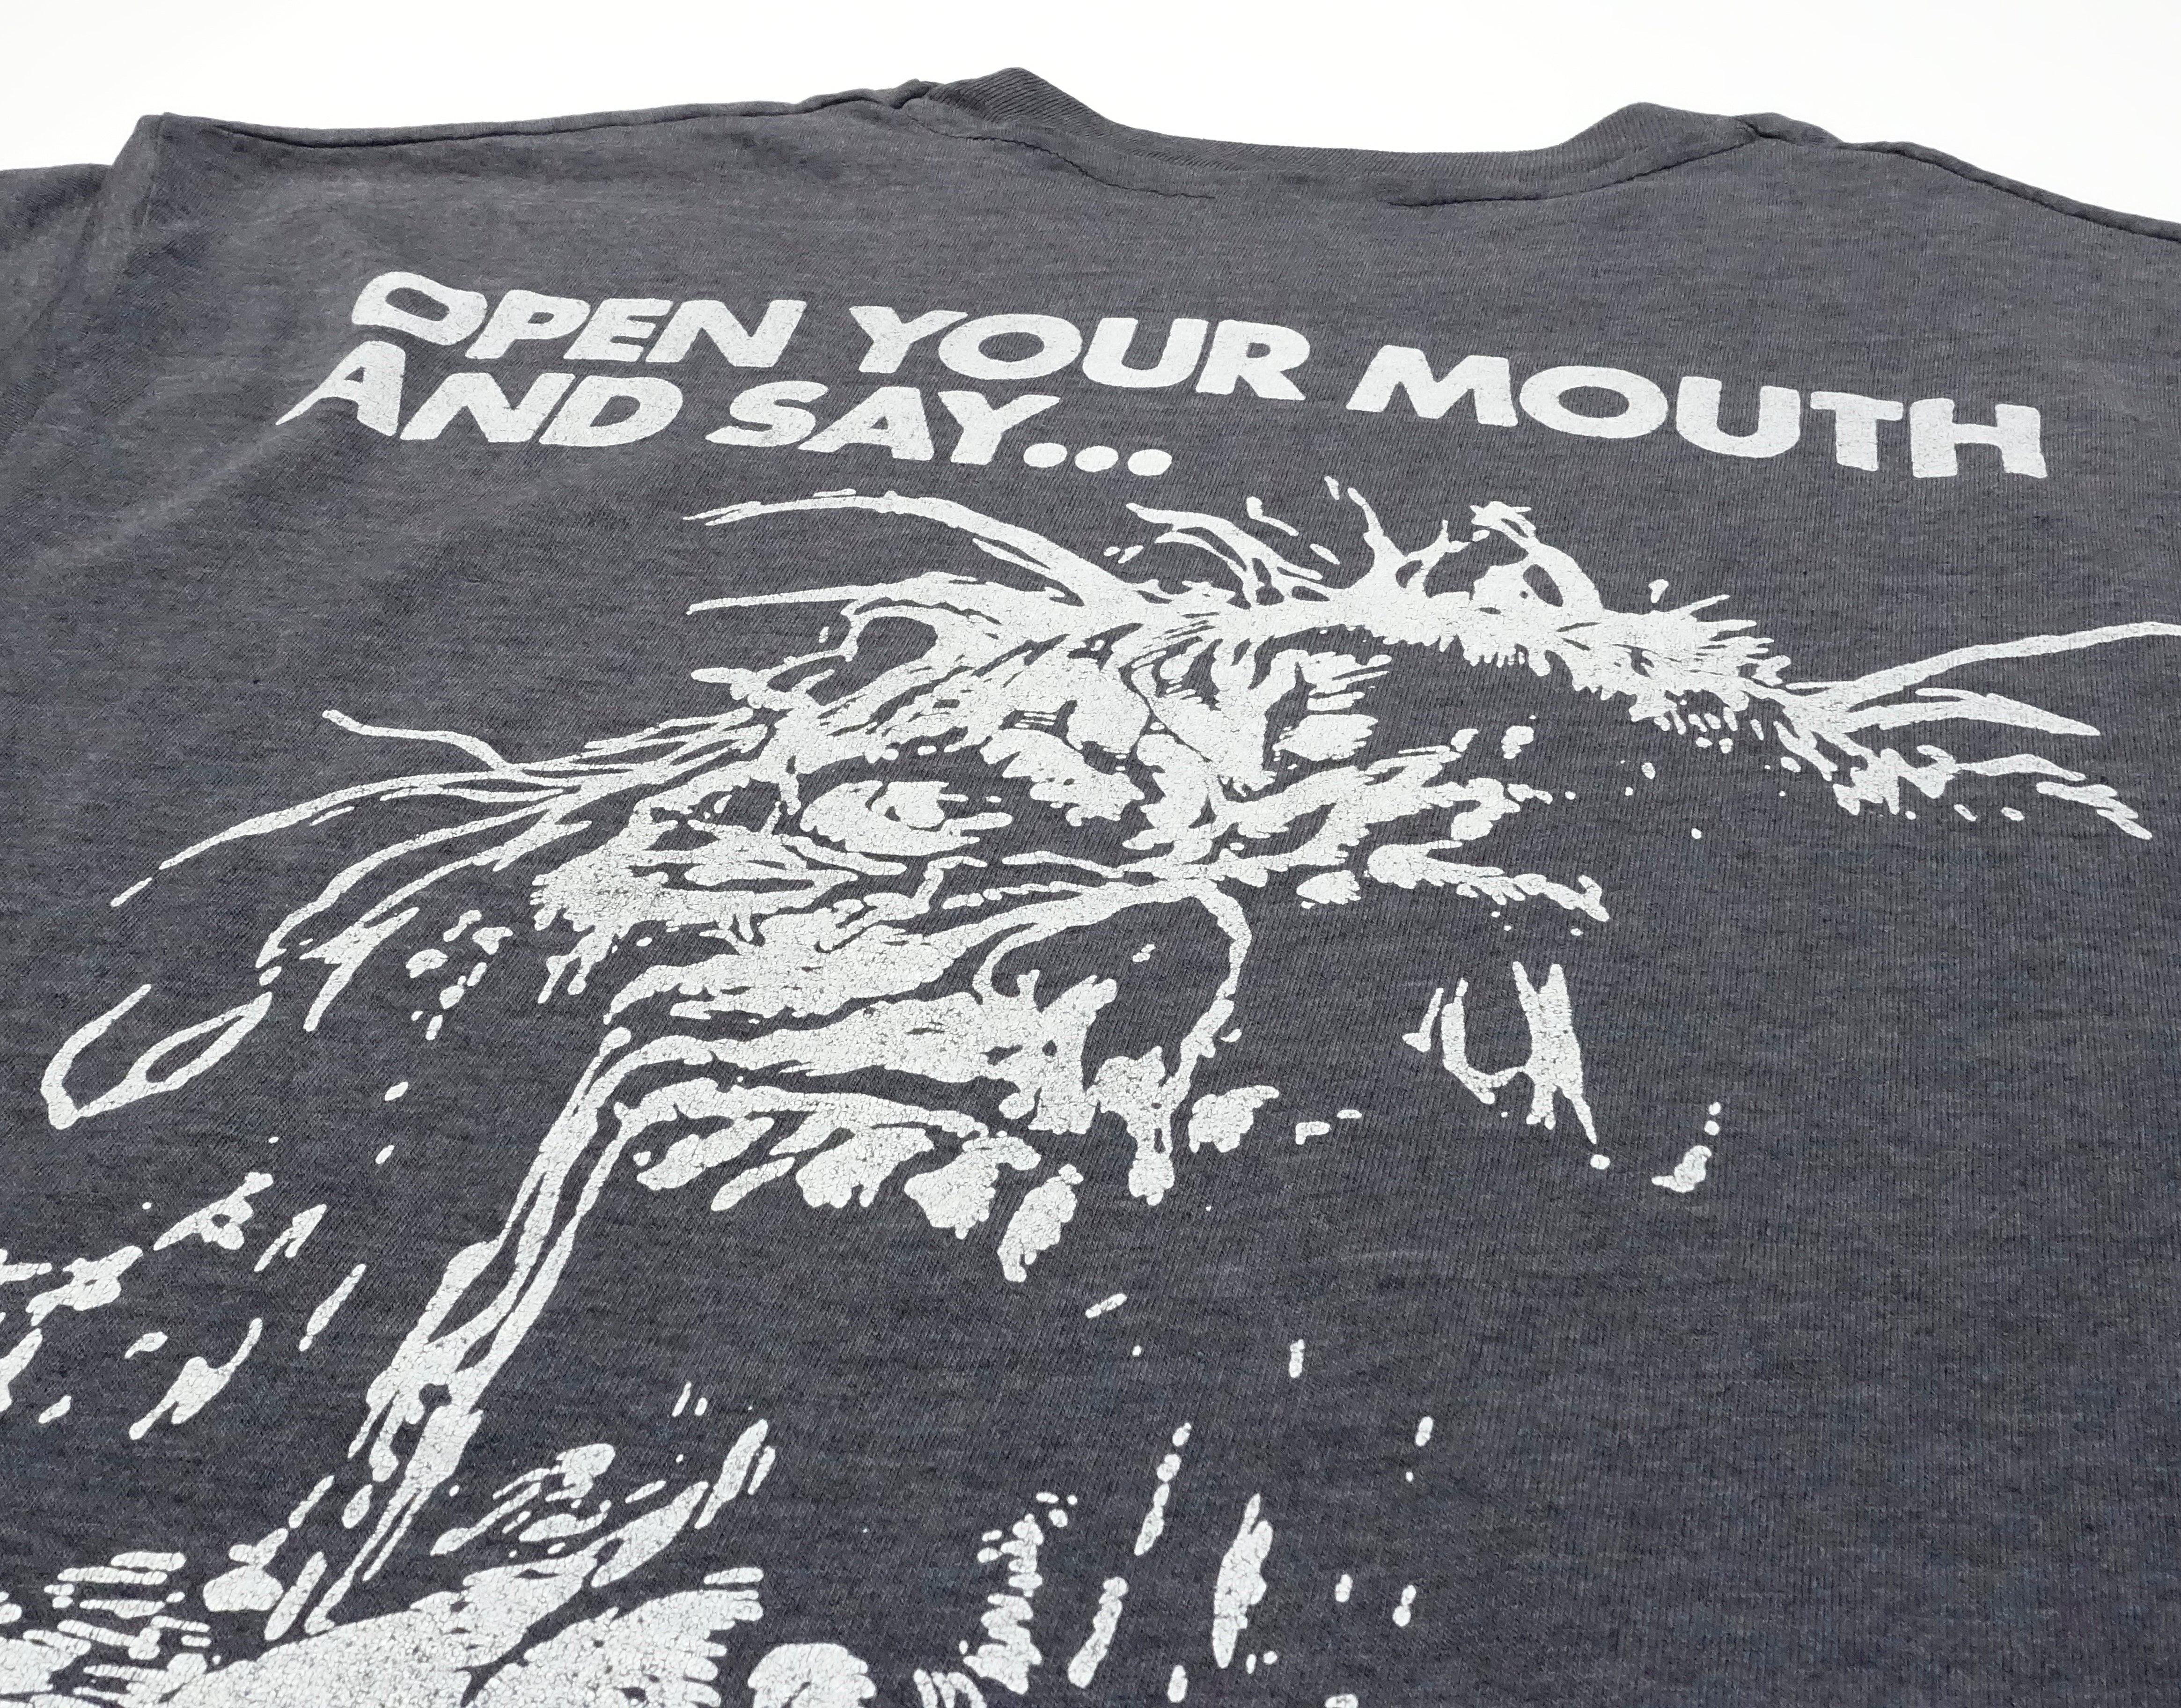 SNFU - Open Your Mouth And Say... Pocket Print Tour Shirt Size Large